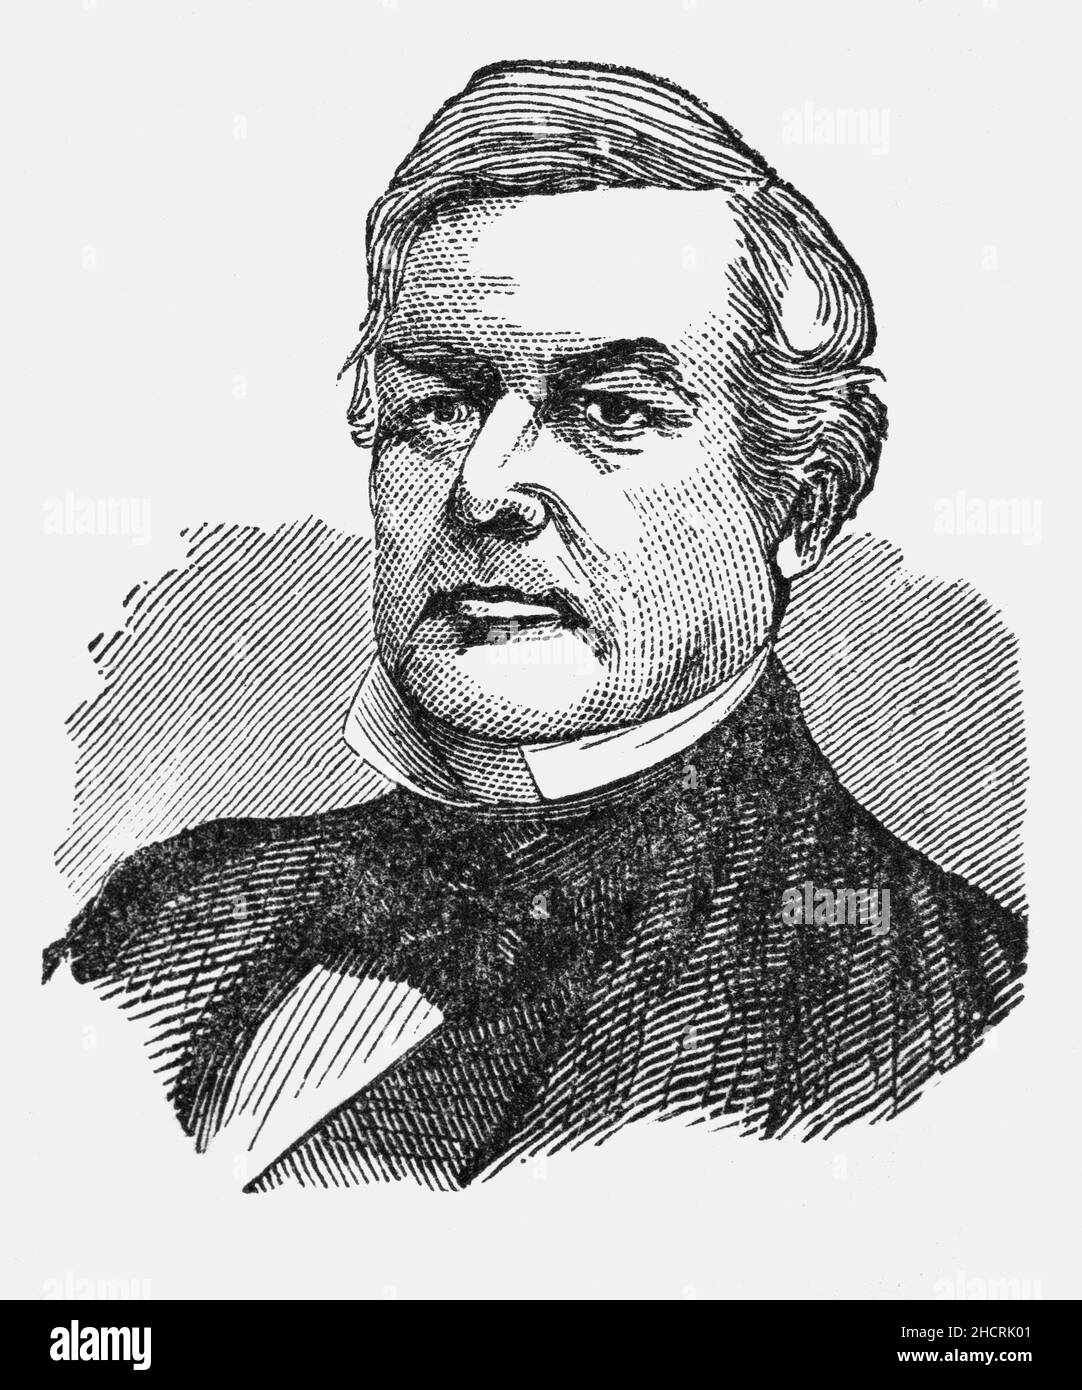 A late 19th Century portrait of Millard Fillmore (1800-1874), the 13th president of the United States, serving from 1850 to 1853 and the last to be a member of the Whig Party while in the White House. A former member of the U.S. House of Representatives from Upstate New York, Fillmore was elected as the 12th vice president in 1848, and succeeded to the presidency in July 1850 upon the death of U.S. President Zachary Taylor. Fillmore was instrumental in the passing of the Compromise of 1850, a bargain that led to a brief truce in the battle over the expansion of slavery. Stock Photo